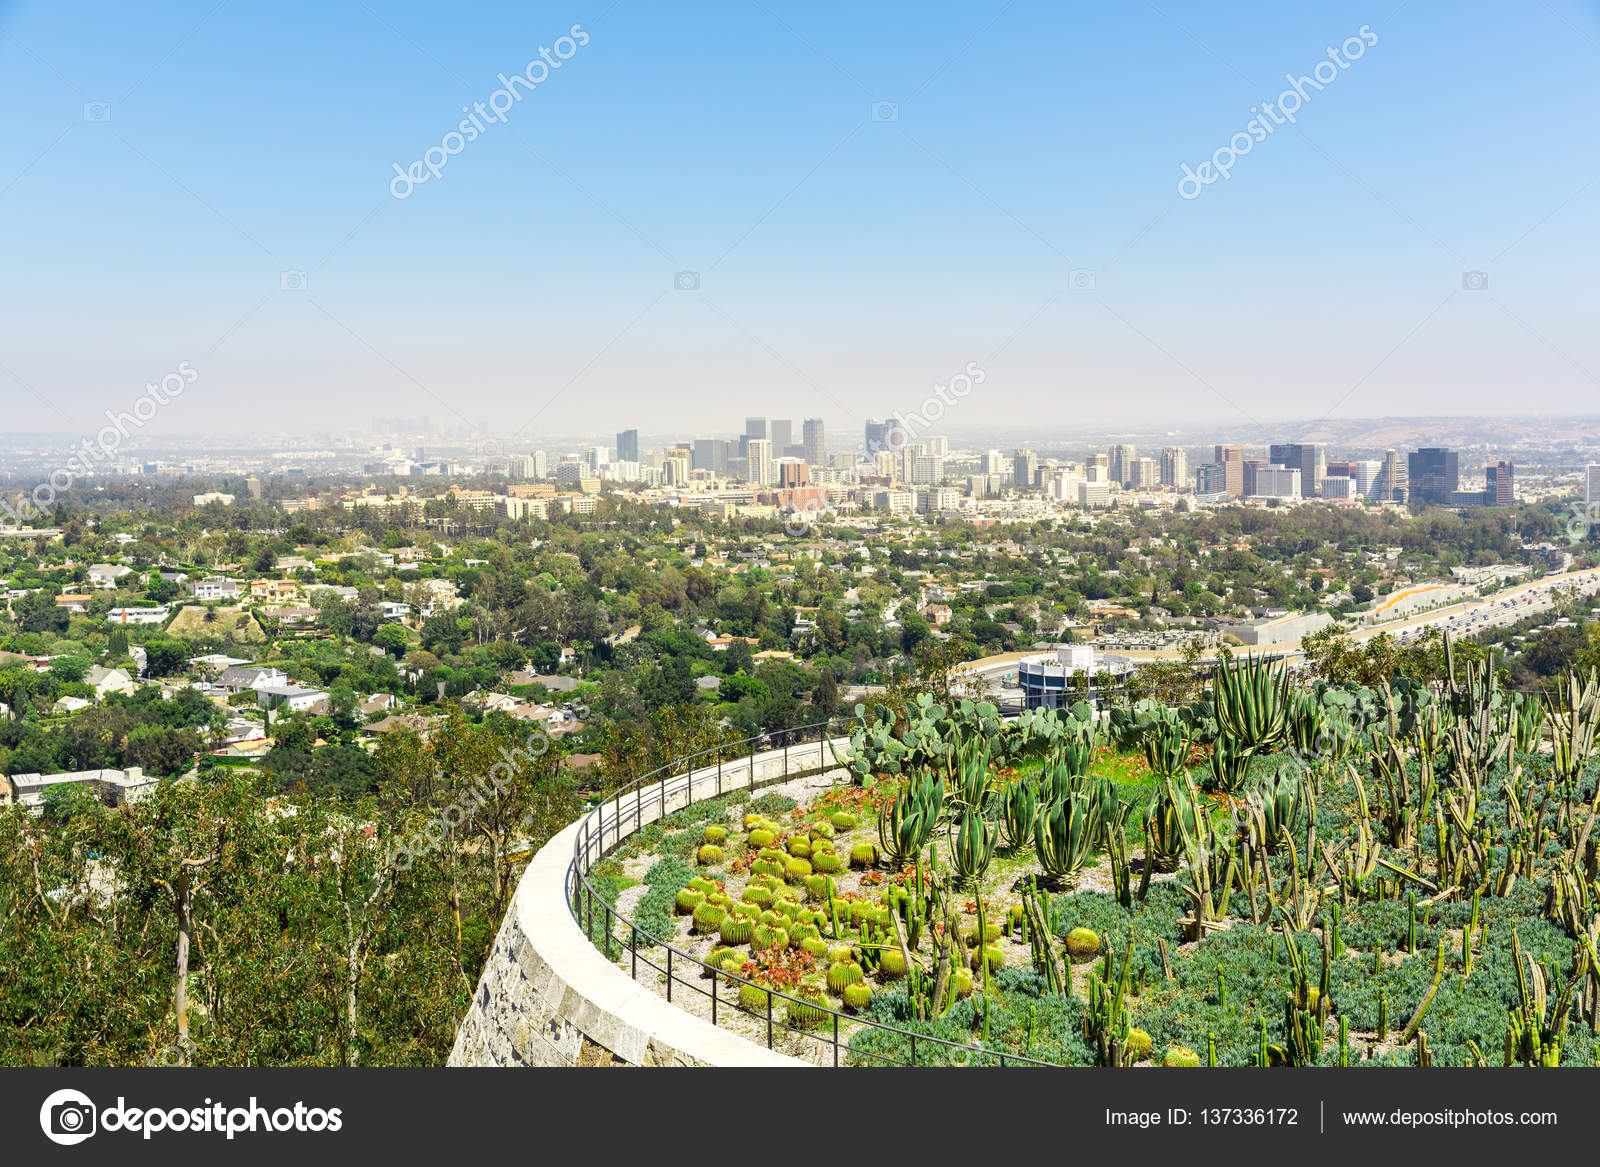 Roof Garden And Cityscape Of Los Angeles Stock Photo